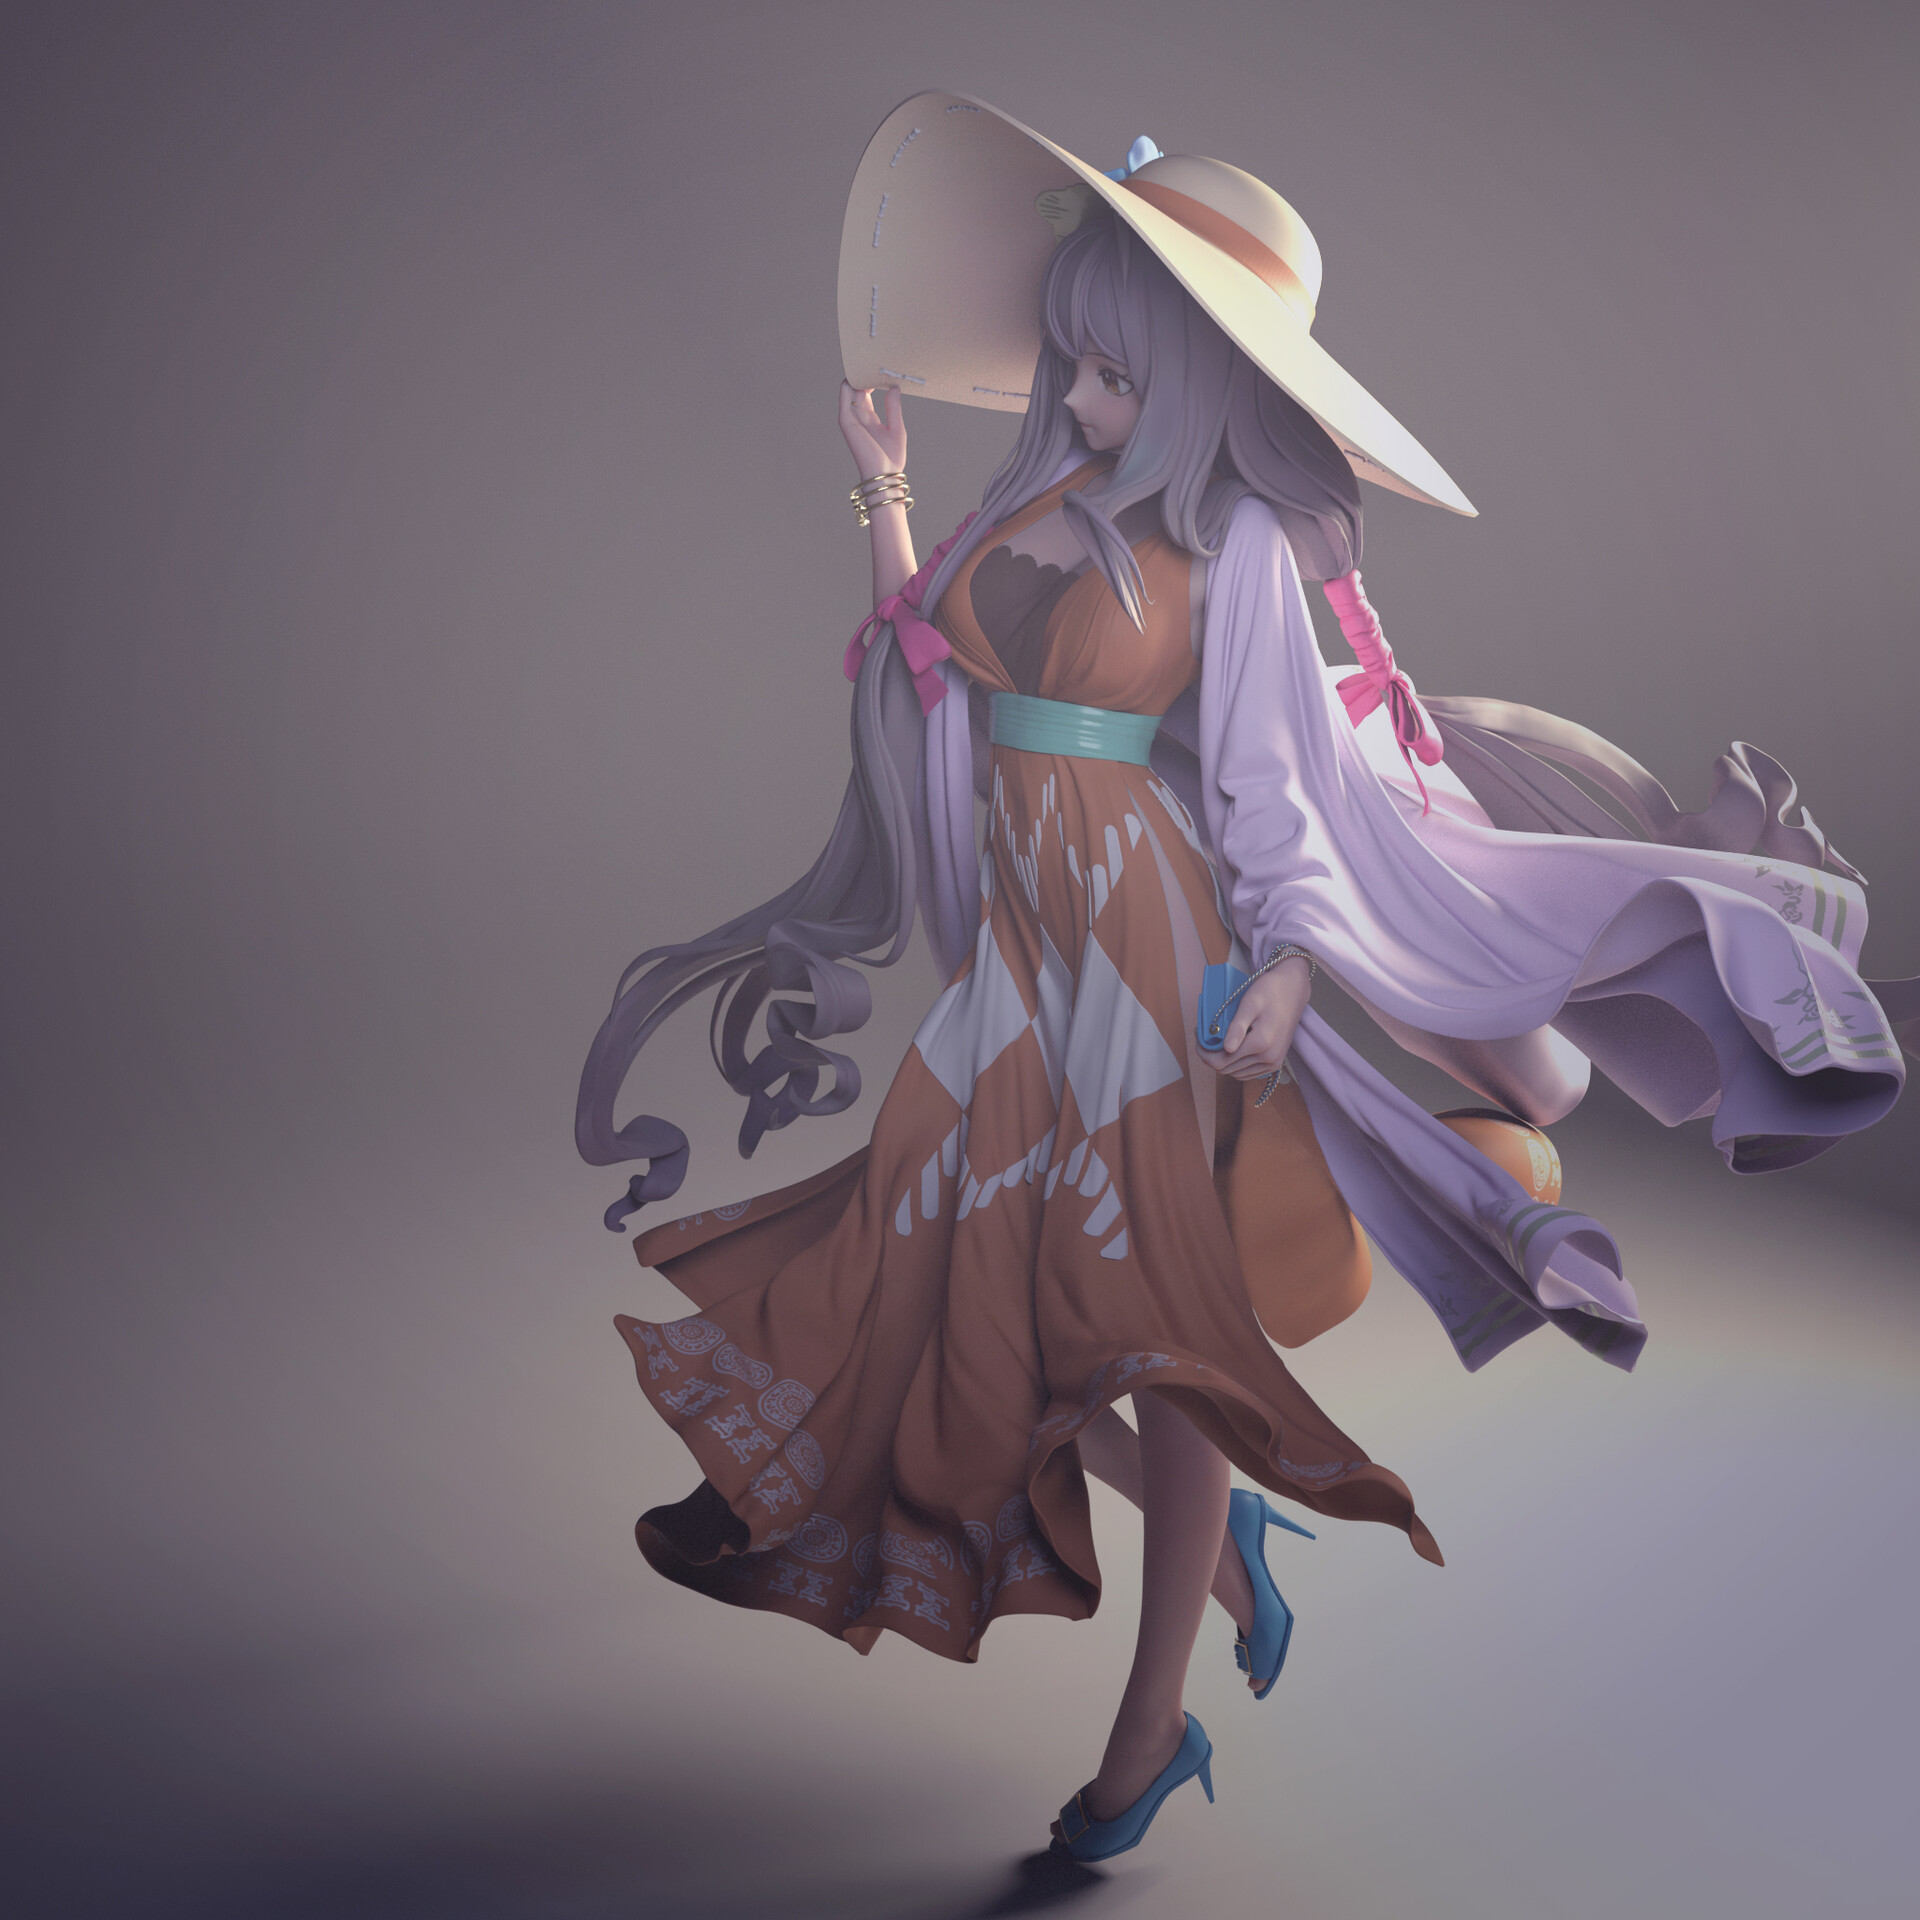 learn zbrush stylized character sculpting with qi sheng luo